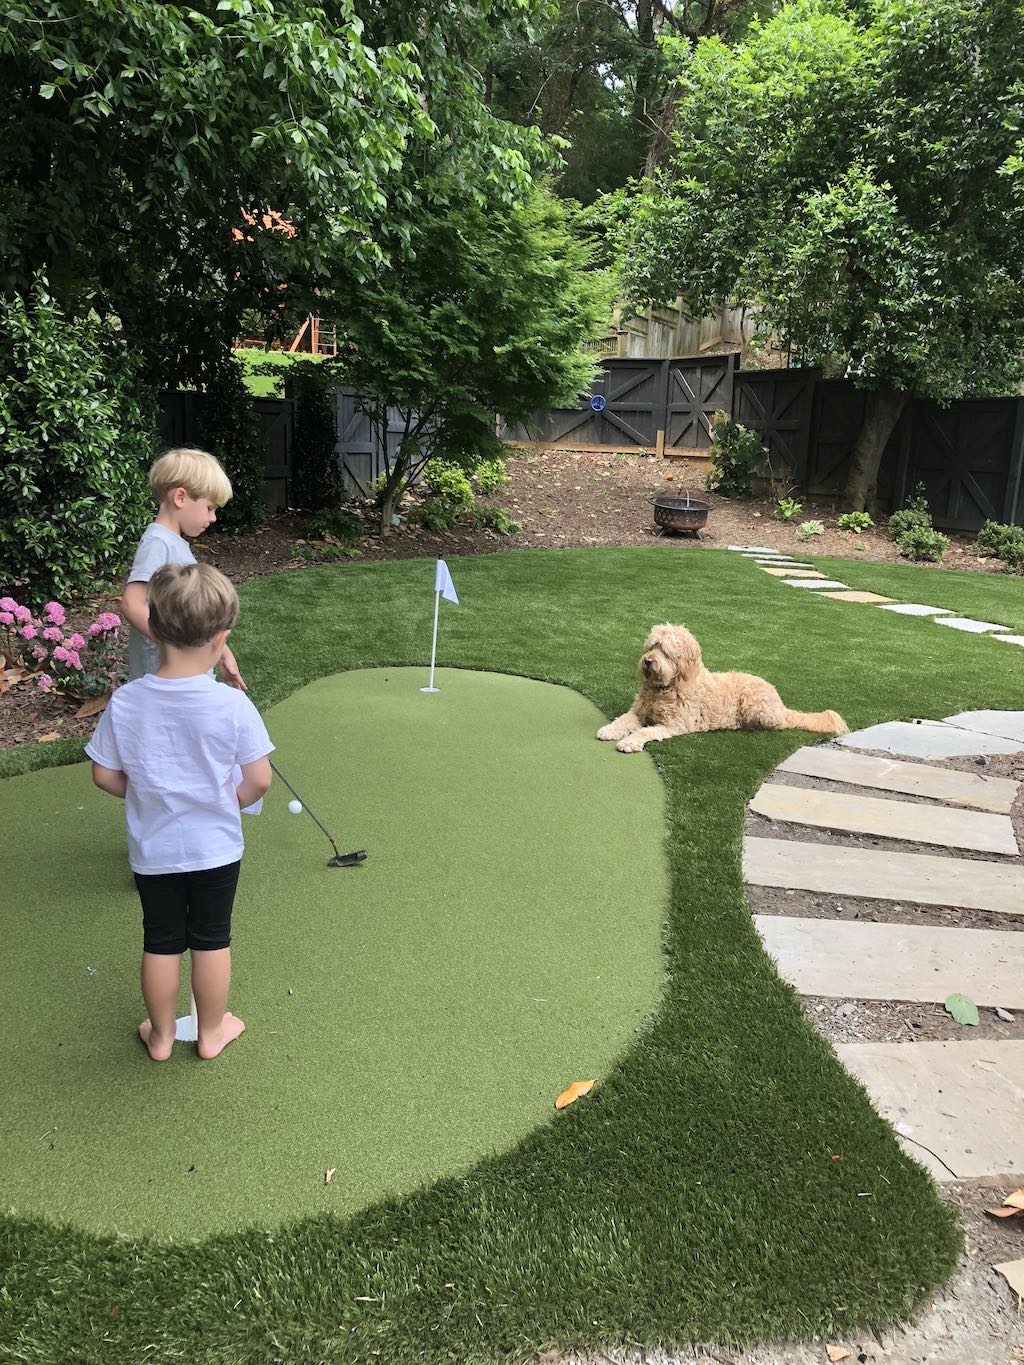 Two children and a dog are in a backyard with a small putting green. There's lush greenery, a fire pit, and stepping stones in the grass.